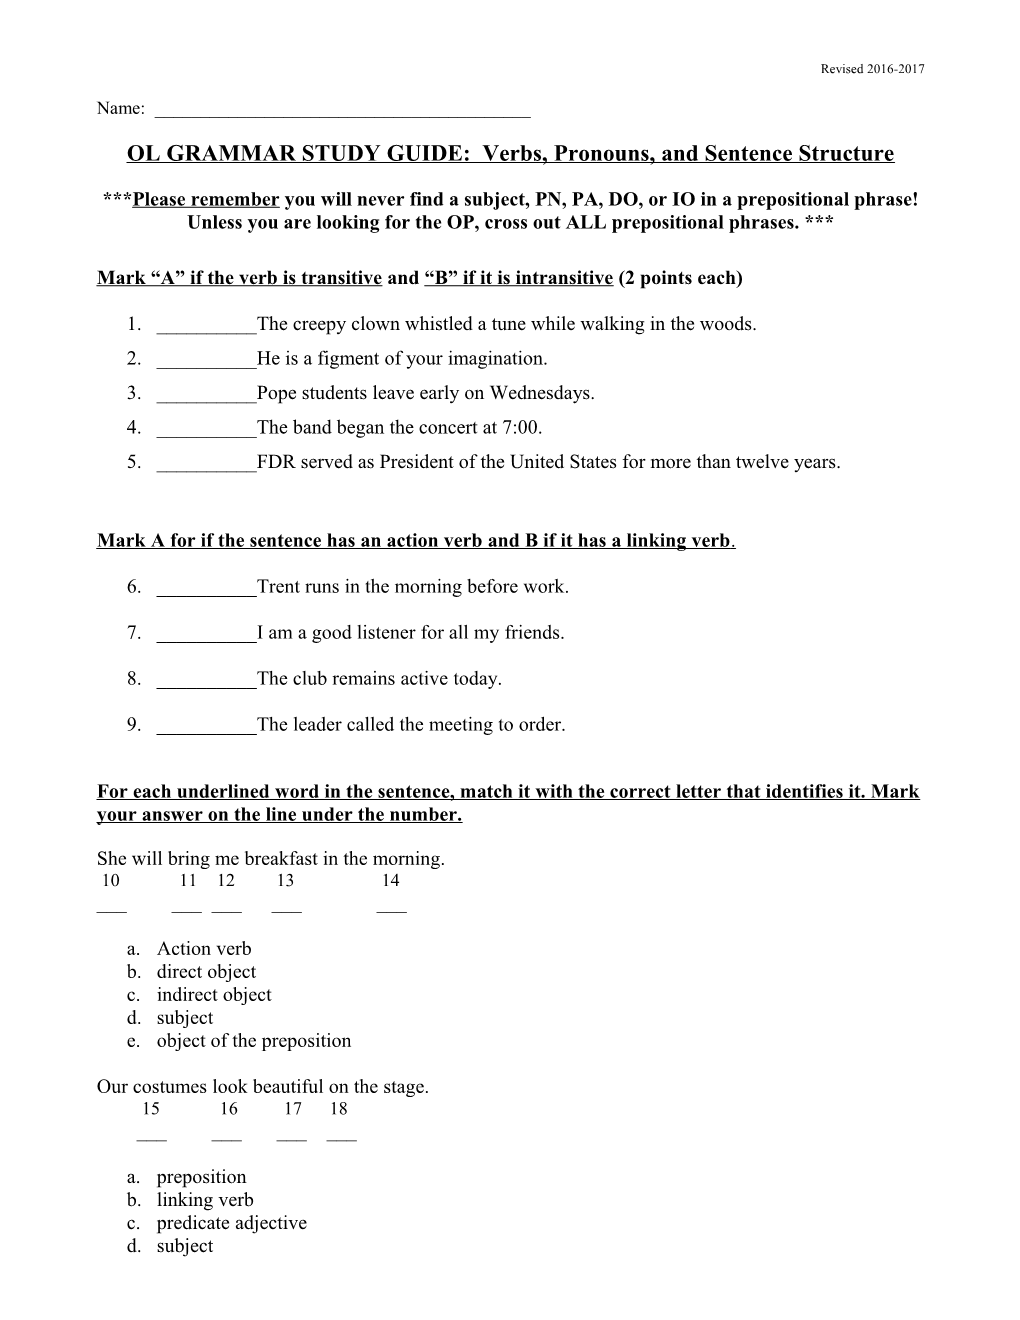 OL GRAMMAR STUDY GUIDE: Verbs, Pronouns, and Sentence Structure